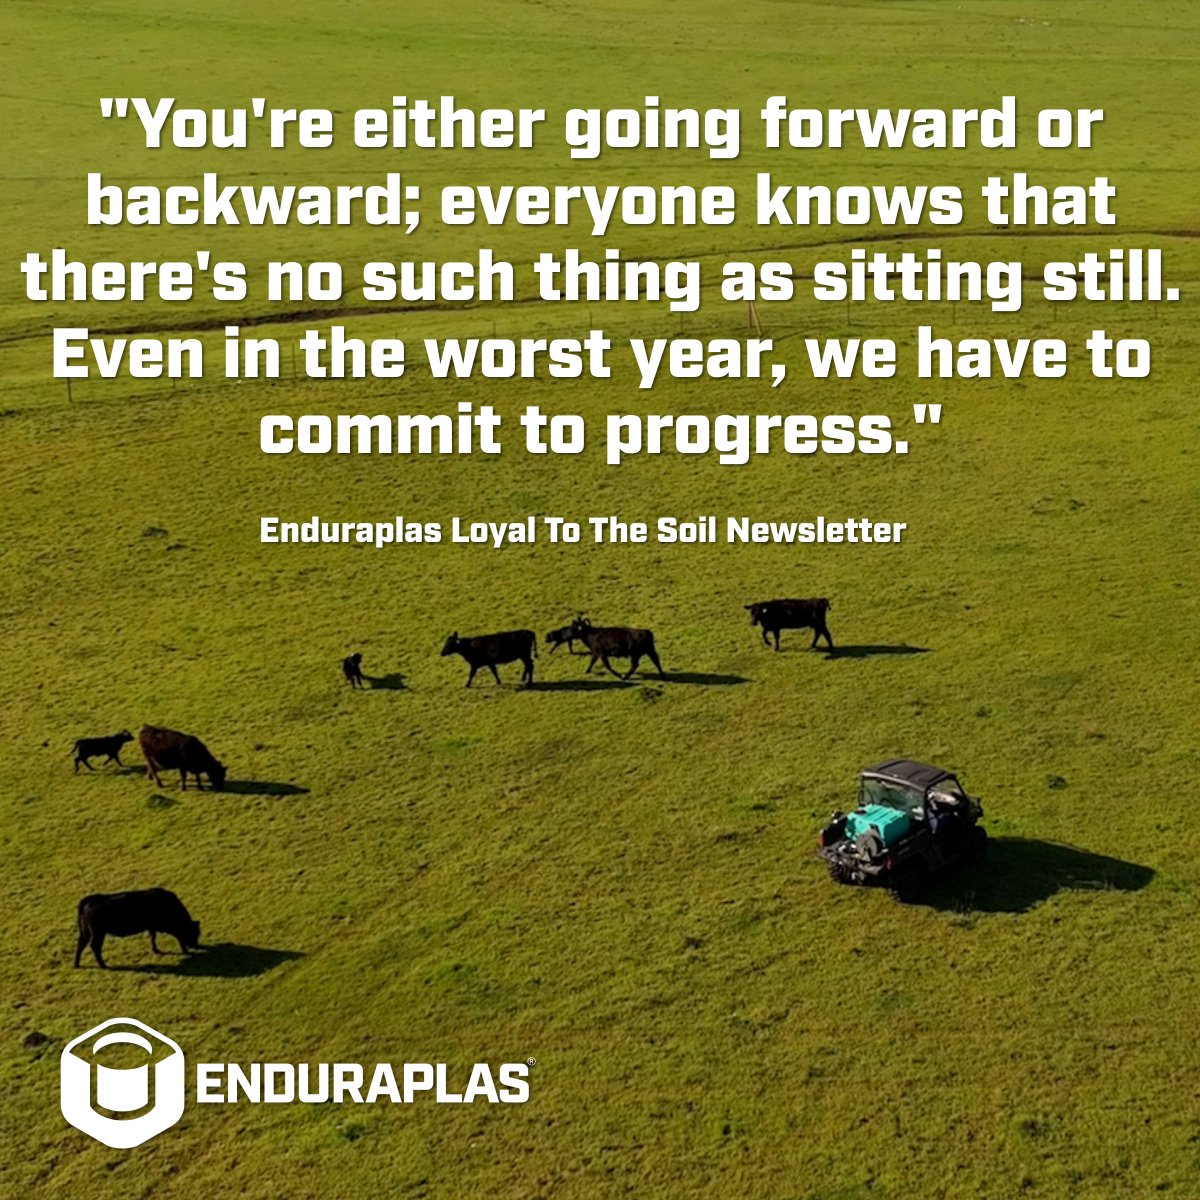 Sign up for our exclusive agriculture newsletter and get tried-and-tested insights from our experienced team that knows the soil just as well as the market. 💡

#Enduraplas #FarmTech #Agriculture #FarmLife #AgInnovation #Agribusiness #Farming #RuralLife #Farmers #SustainableAg